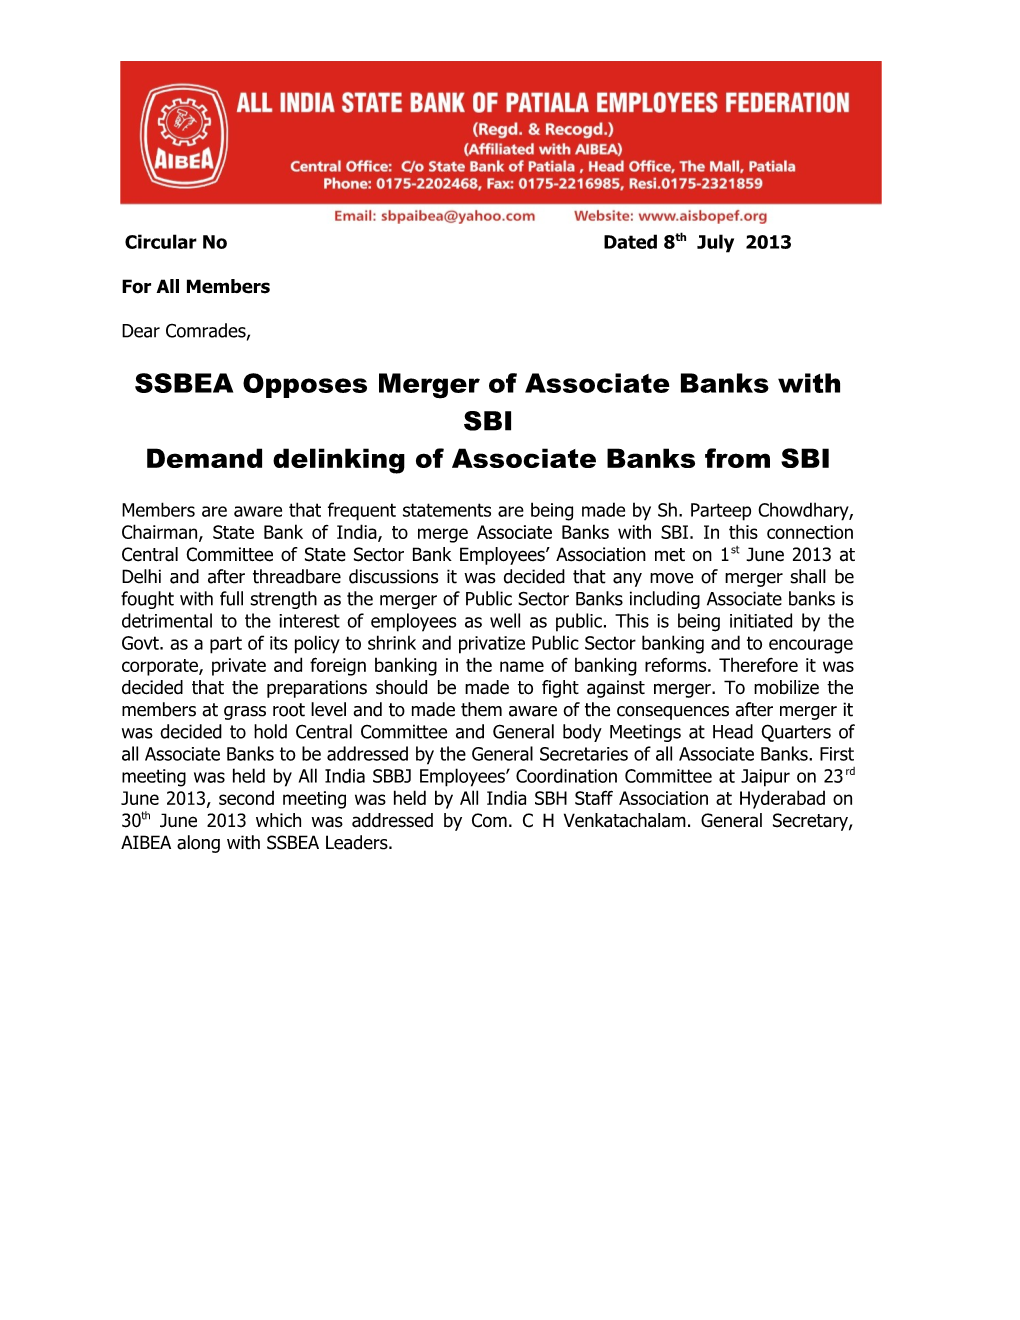 SSBEA Opposes Merger of Associate Banks with SBI